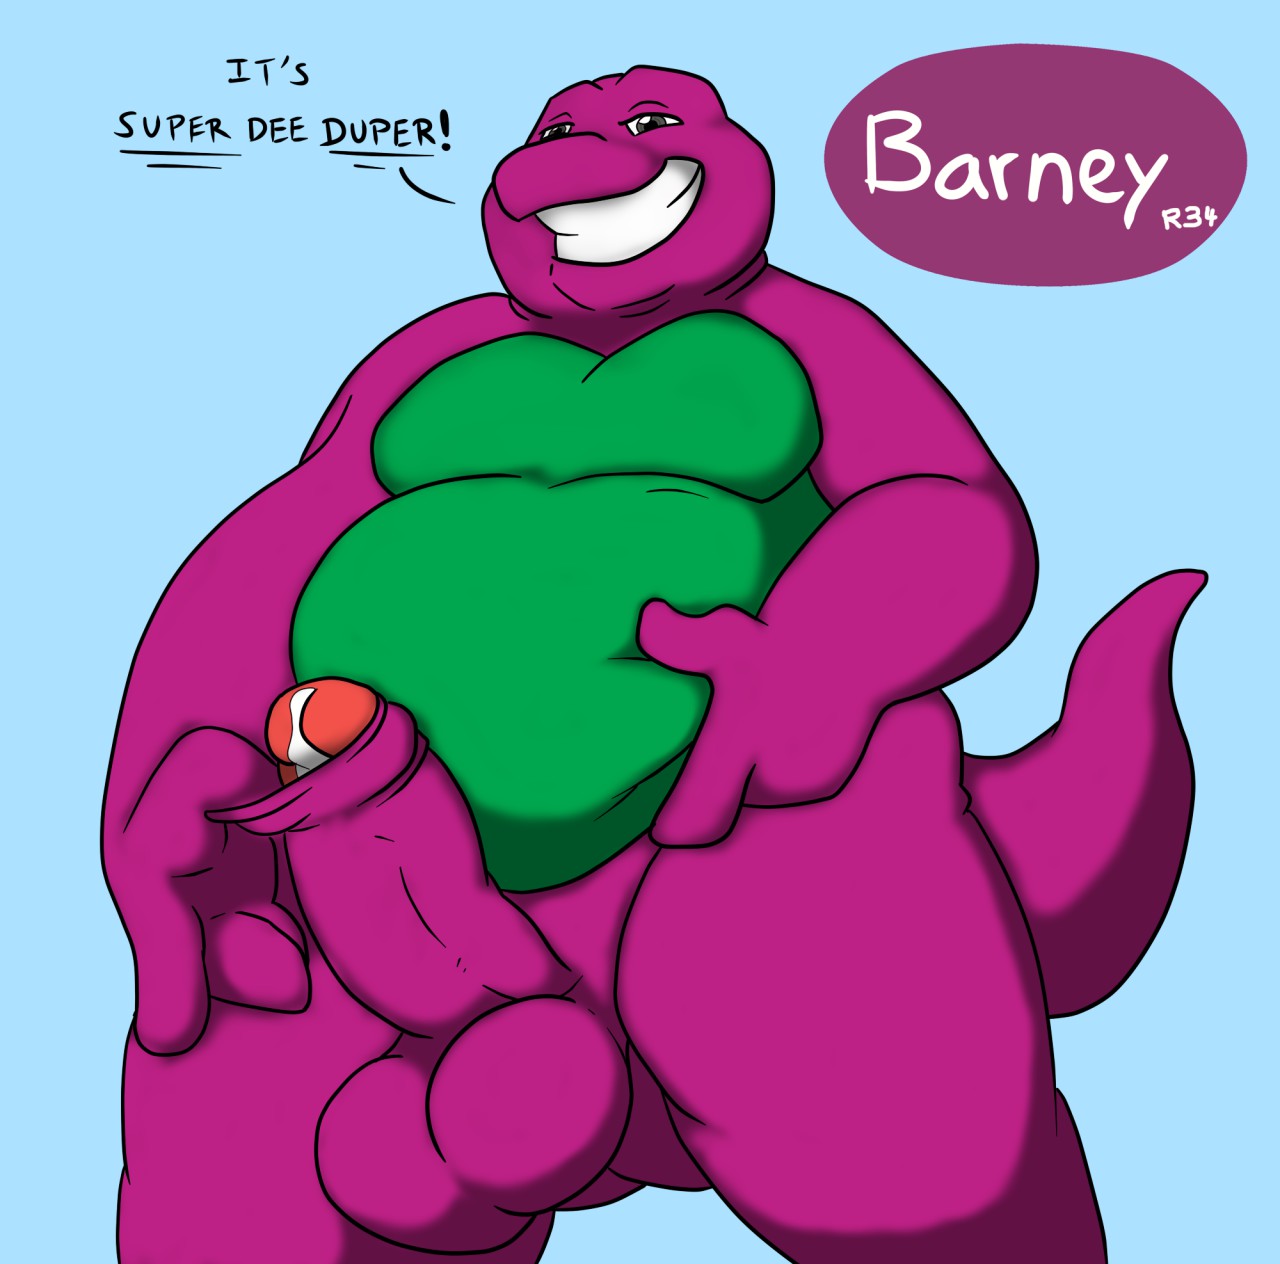 alt="Barney And Friends Porn" title="Barney And Friends Porn"630" width="550" alt...